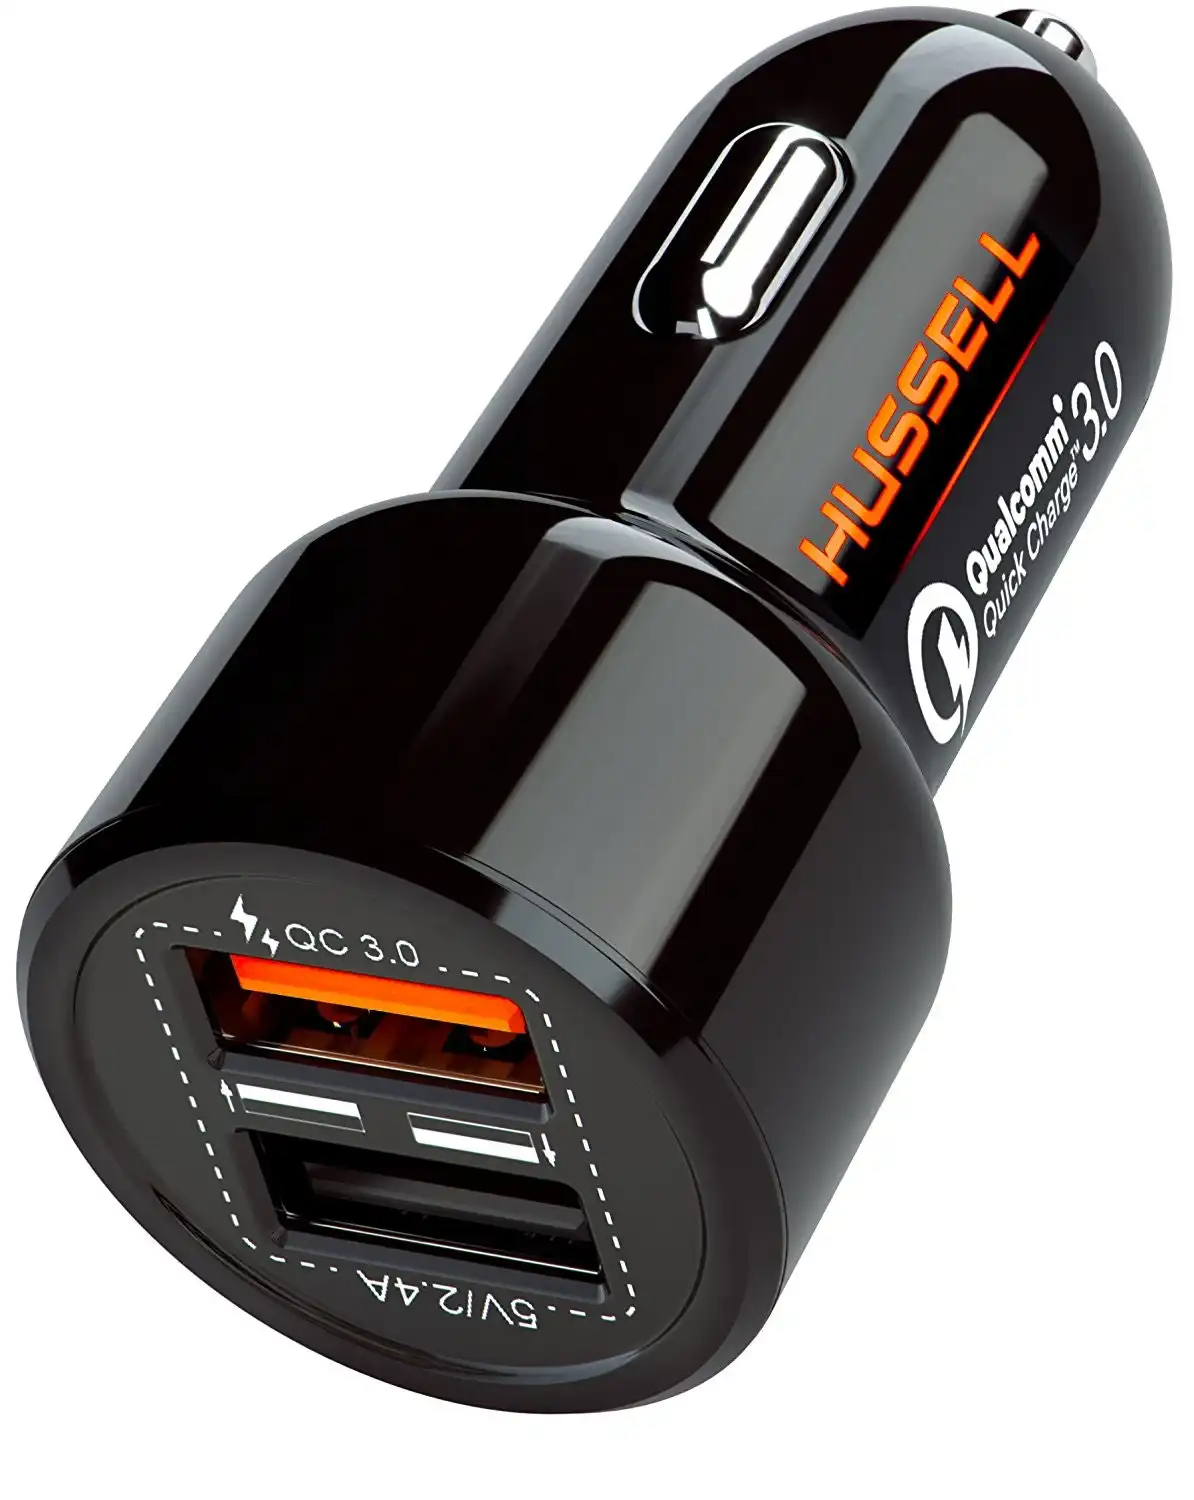 HUSSELL Car Charger. Quick Charge 3.0 + 2.4A Smart IC Dual USB Car Charger Adapter for any iOS or Android Devices: Samsung and More